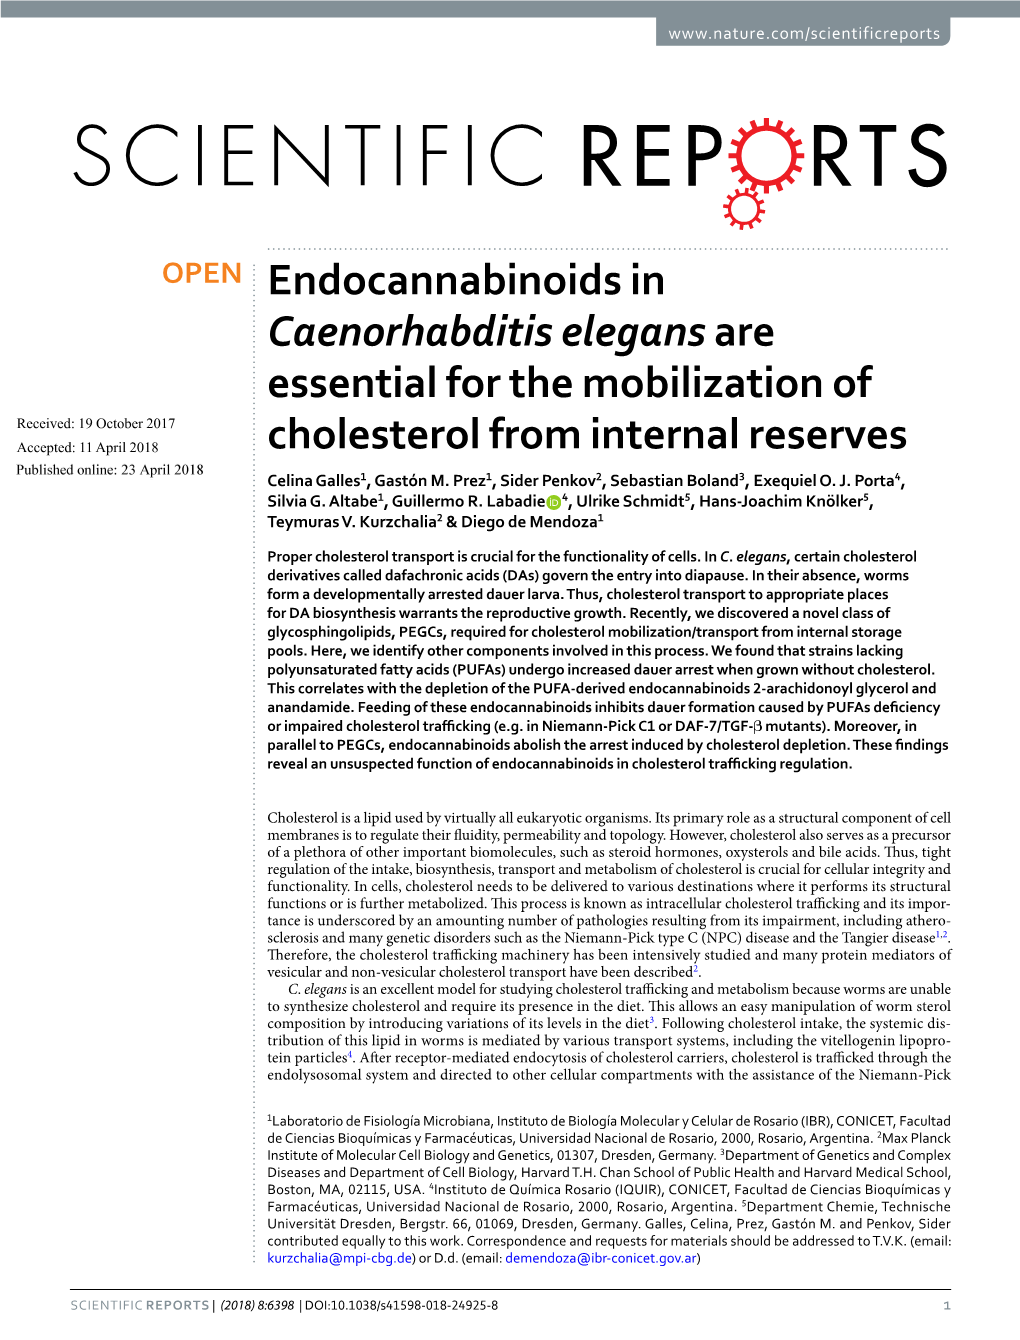 Endocannabinoids in Caenorhabditis Elegans Are Essential for the Mobilization of Cholesterol from Internal Reserves